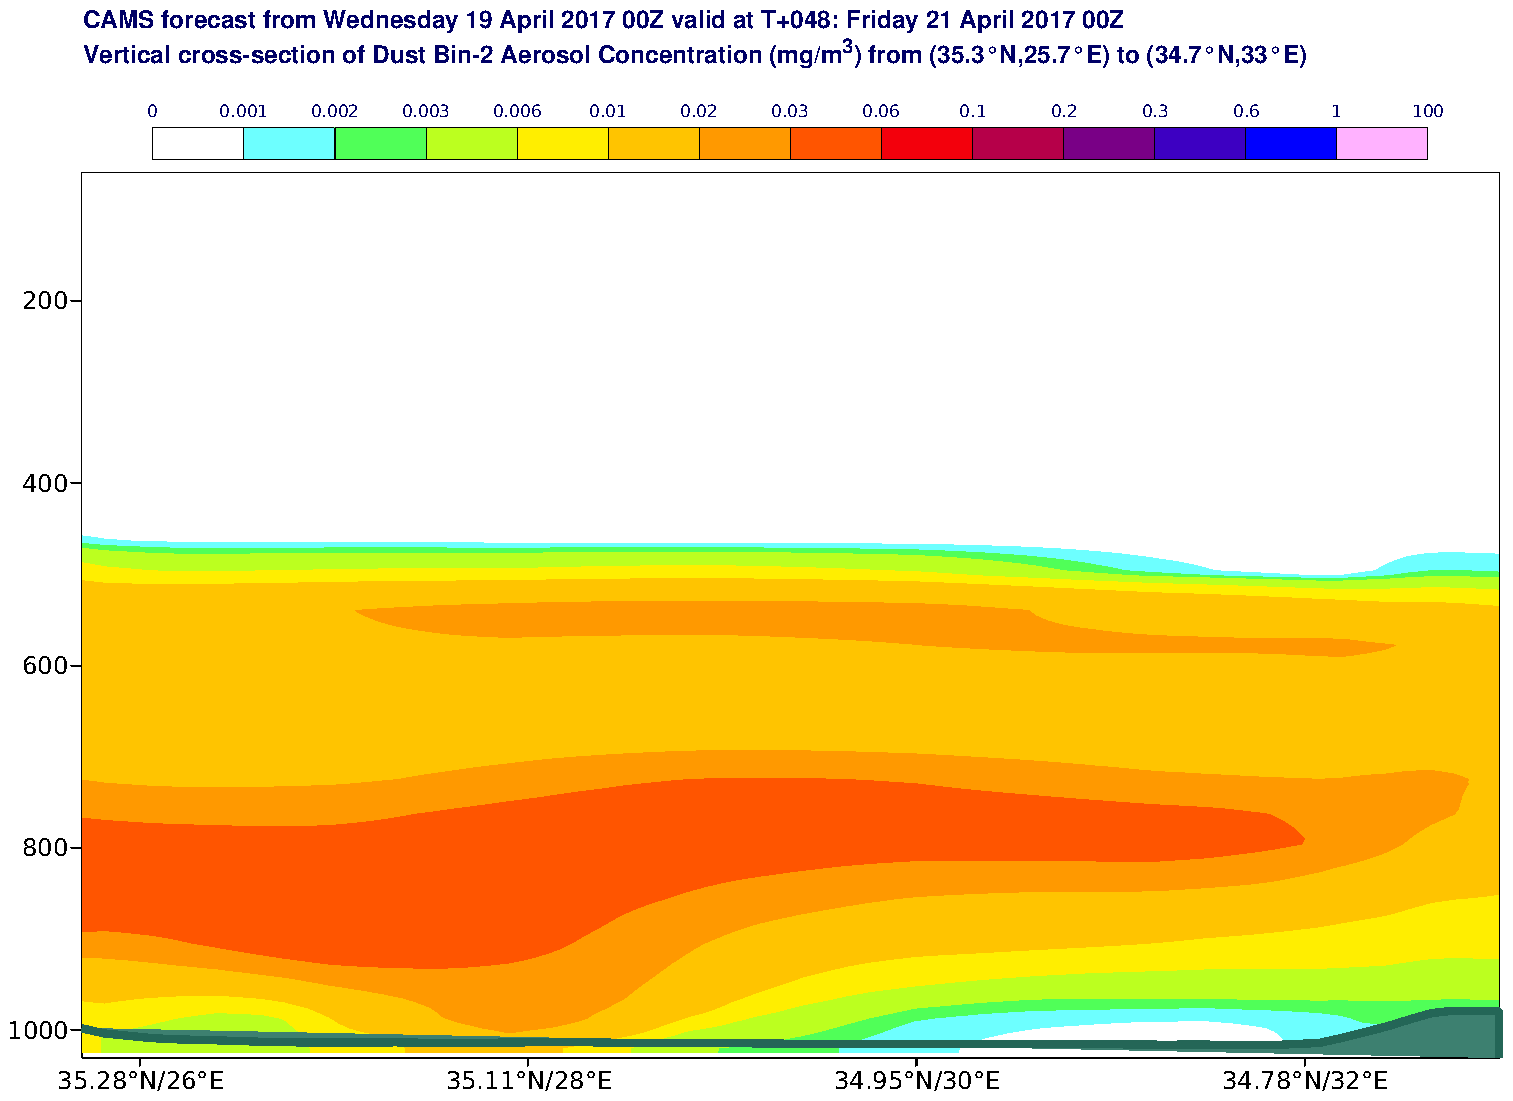 Vertical cross-section of Dust Bin-2 Aerosol Concentration (mg/m3) valid at T48 - 2017-04-21 00:00